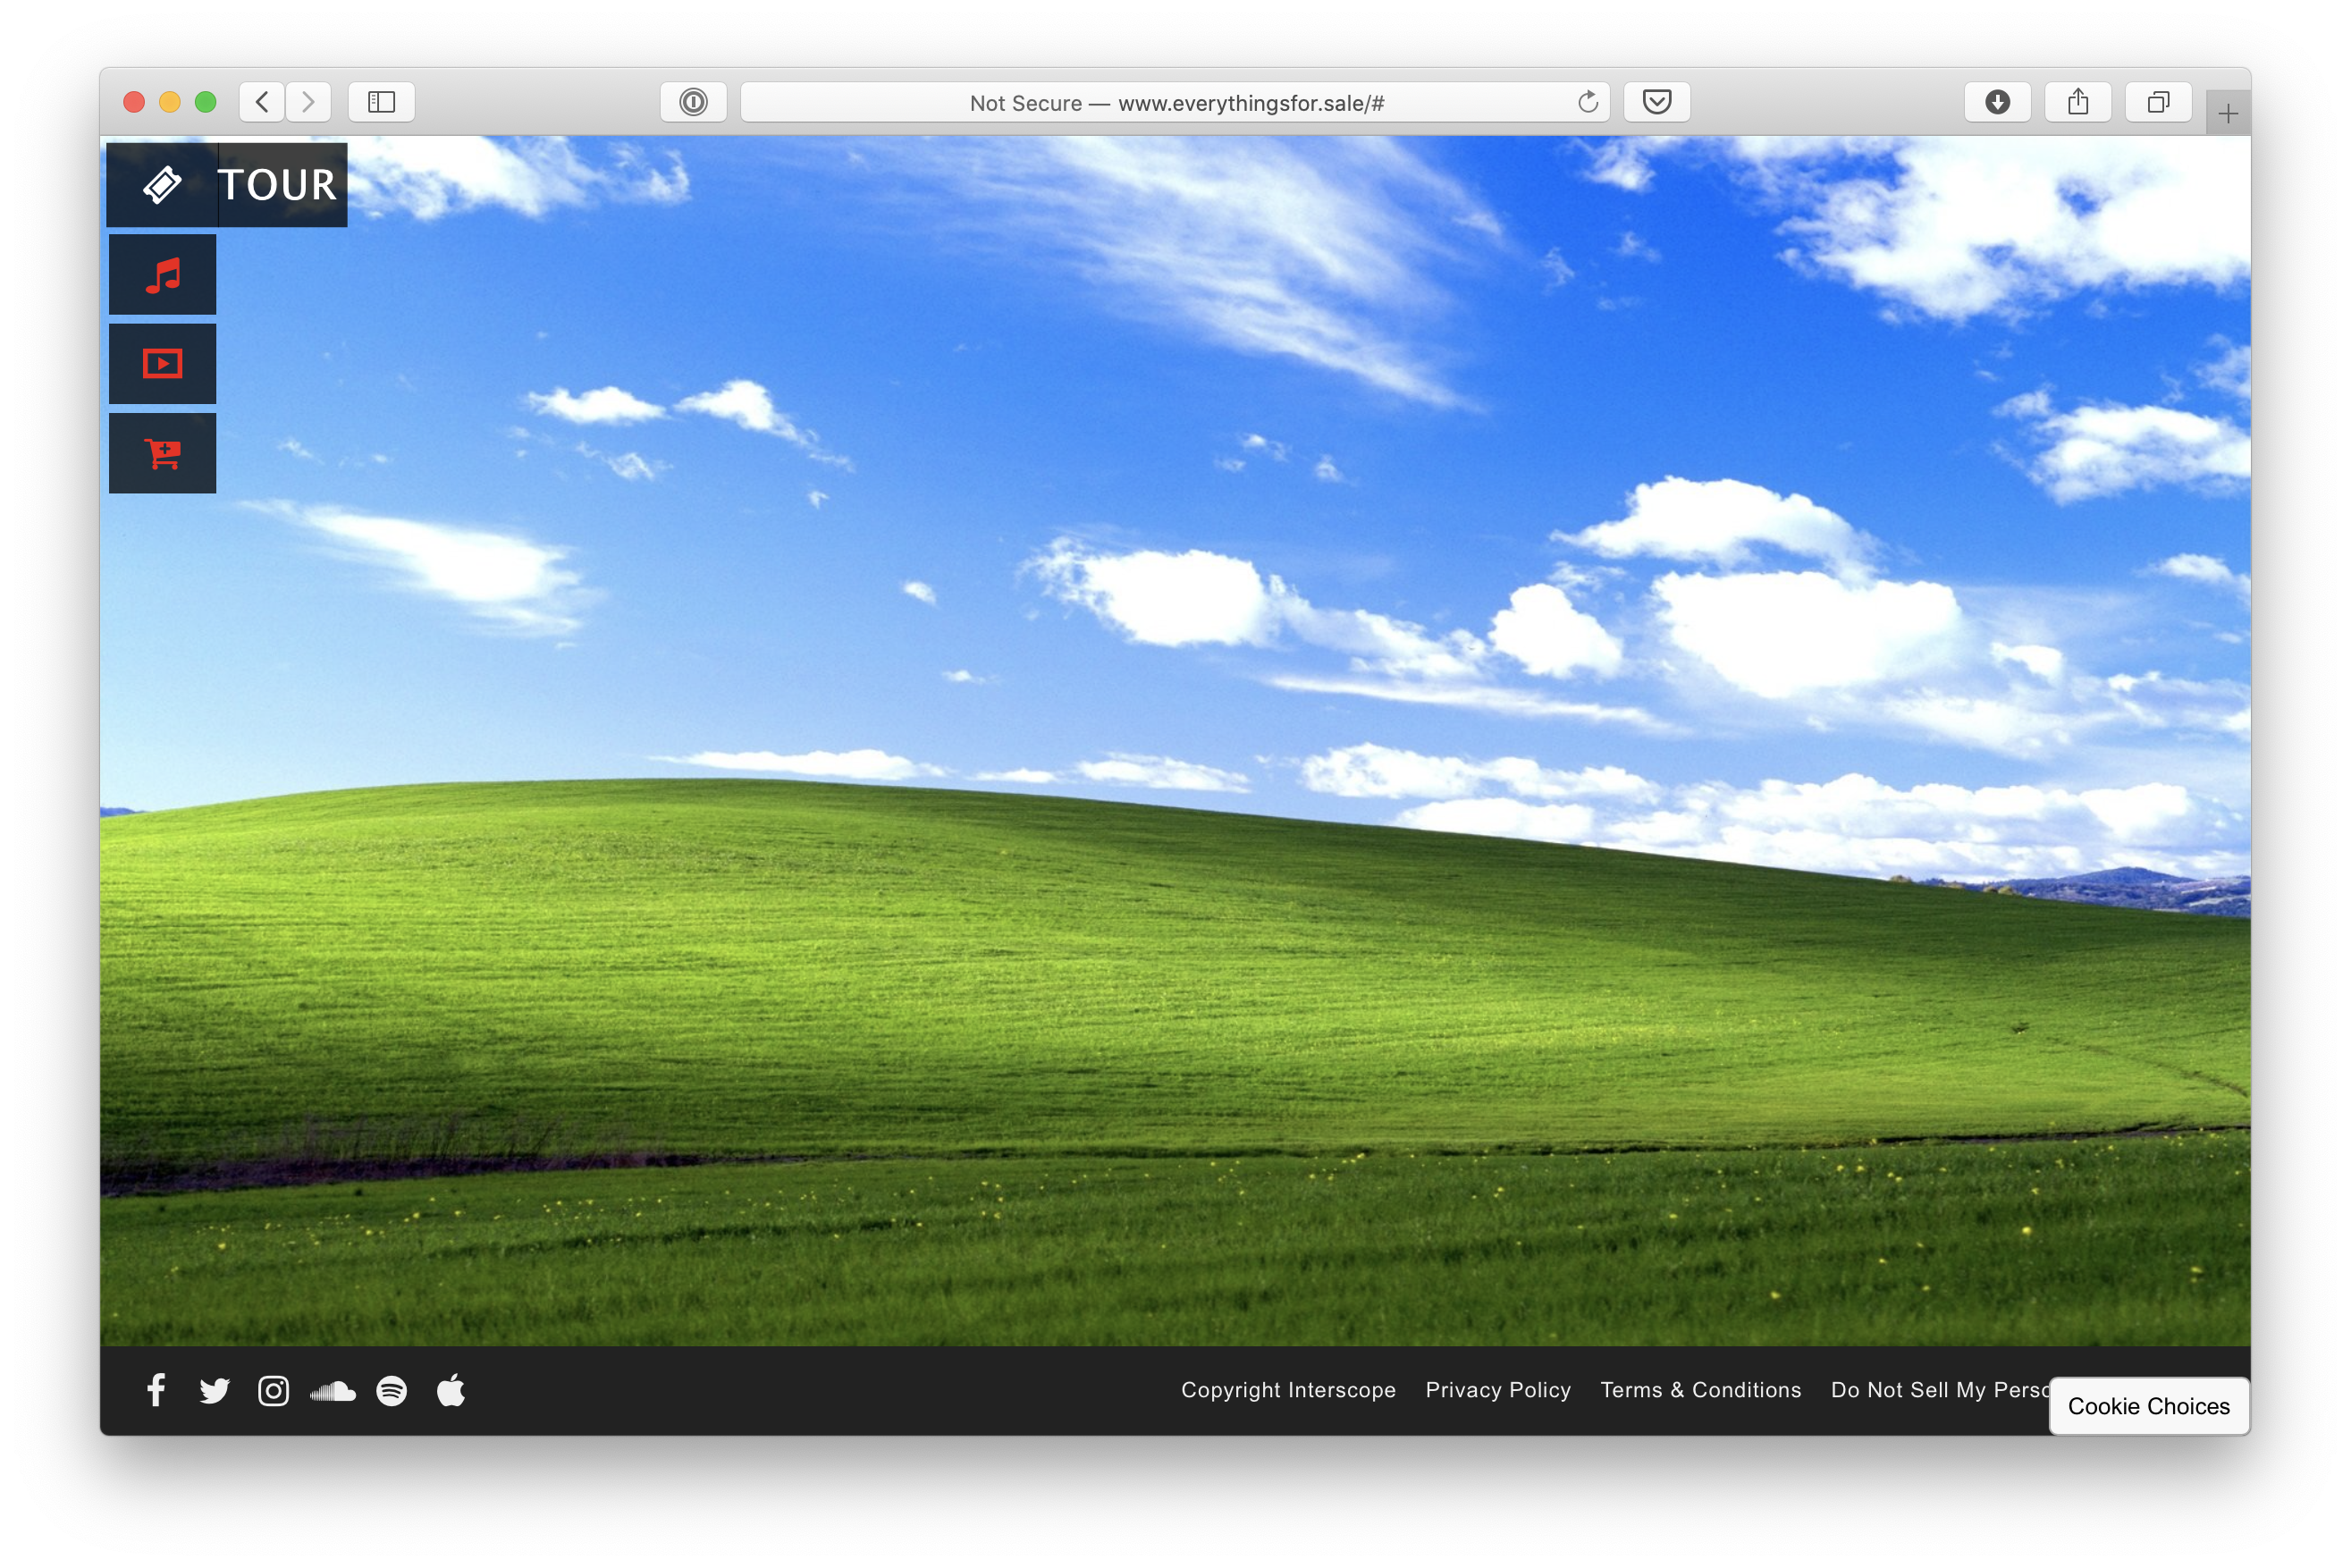 Boogie home page in the style of Windows XP